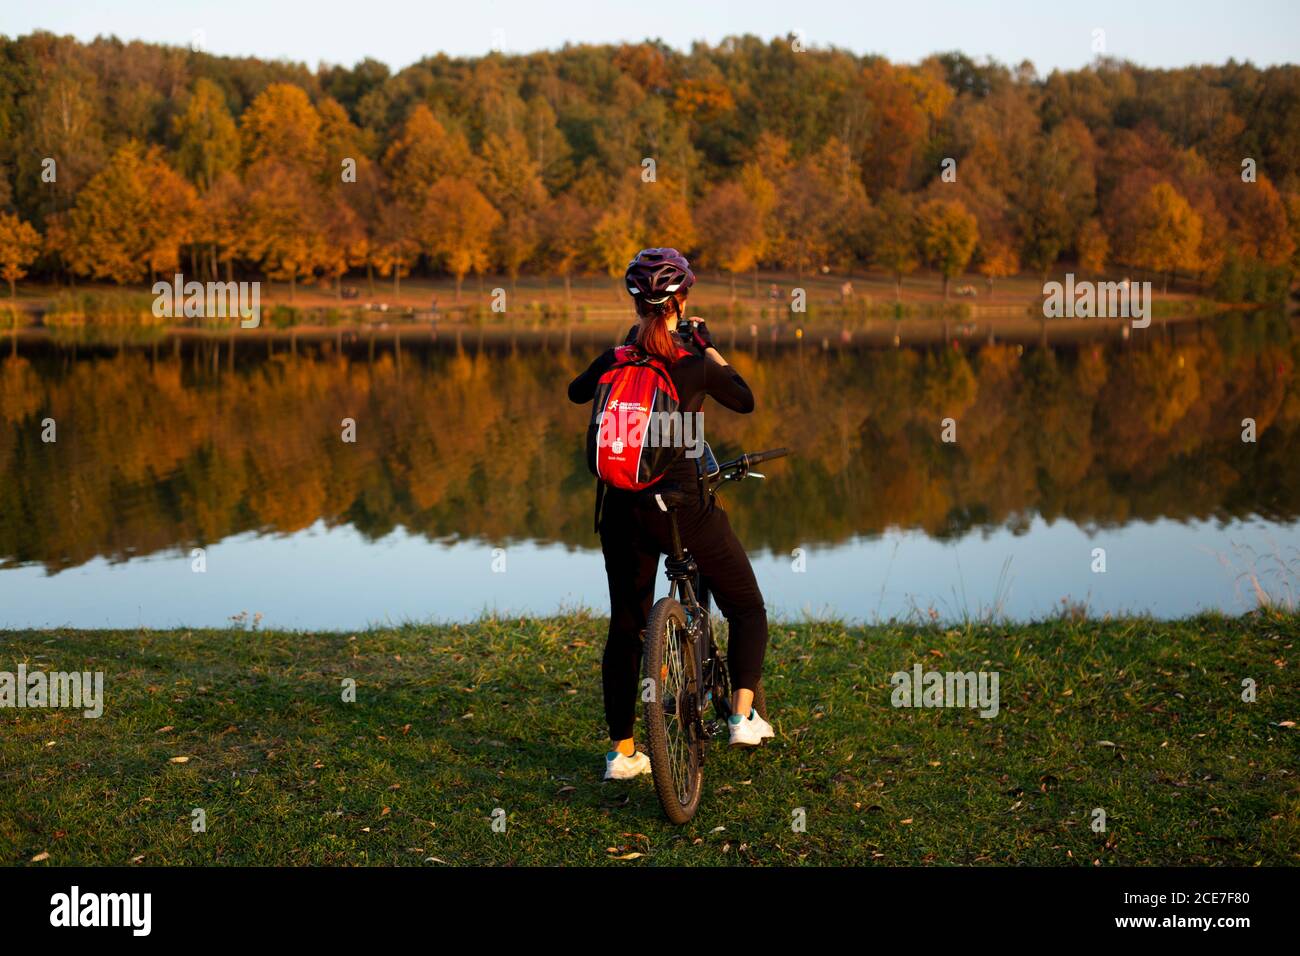 Katowice, Poland. 12th October, 2018. A woman is seen on a bicyle near Kajakowy lake at the Valley of Three Ponds in Katowice. Stock Photo